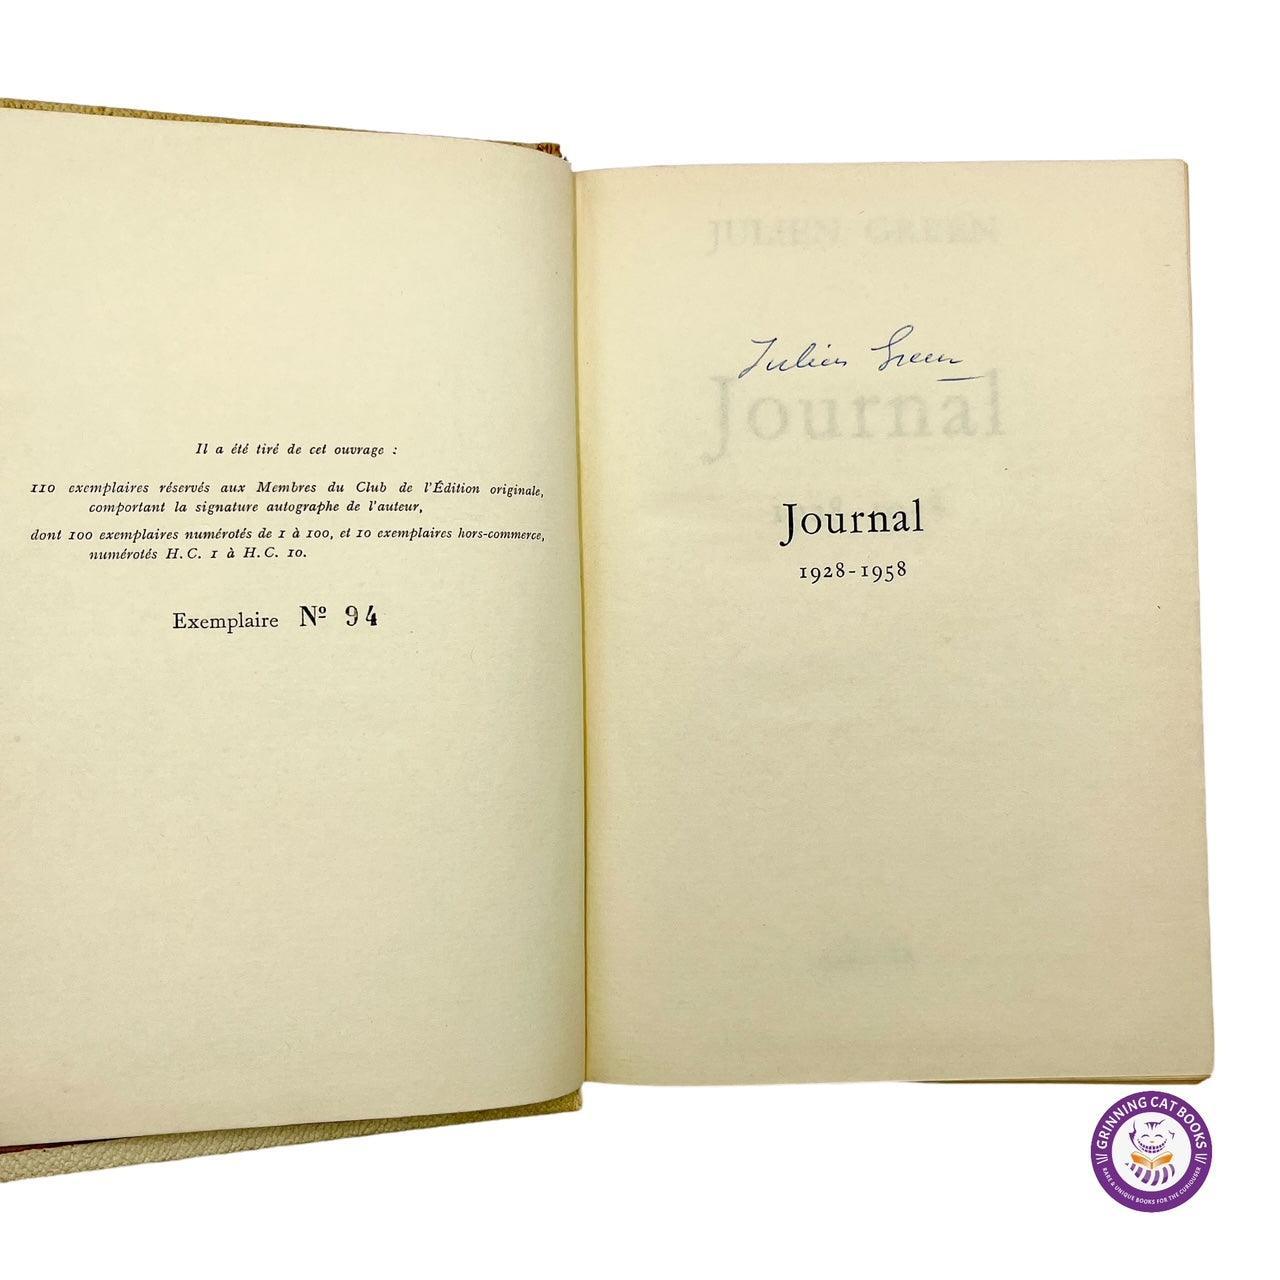 Journal: 1928-1958 (Of Julian Green, in the native French) - Grinning Cat Books - LITERATURE - FRENCH LITERATURE